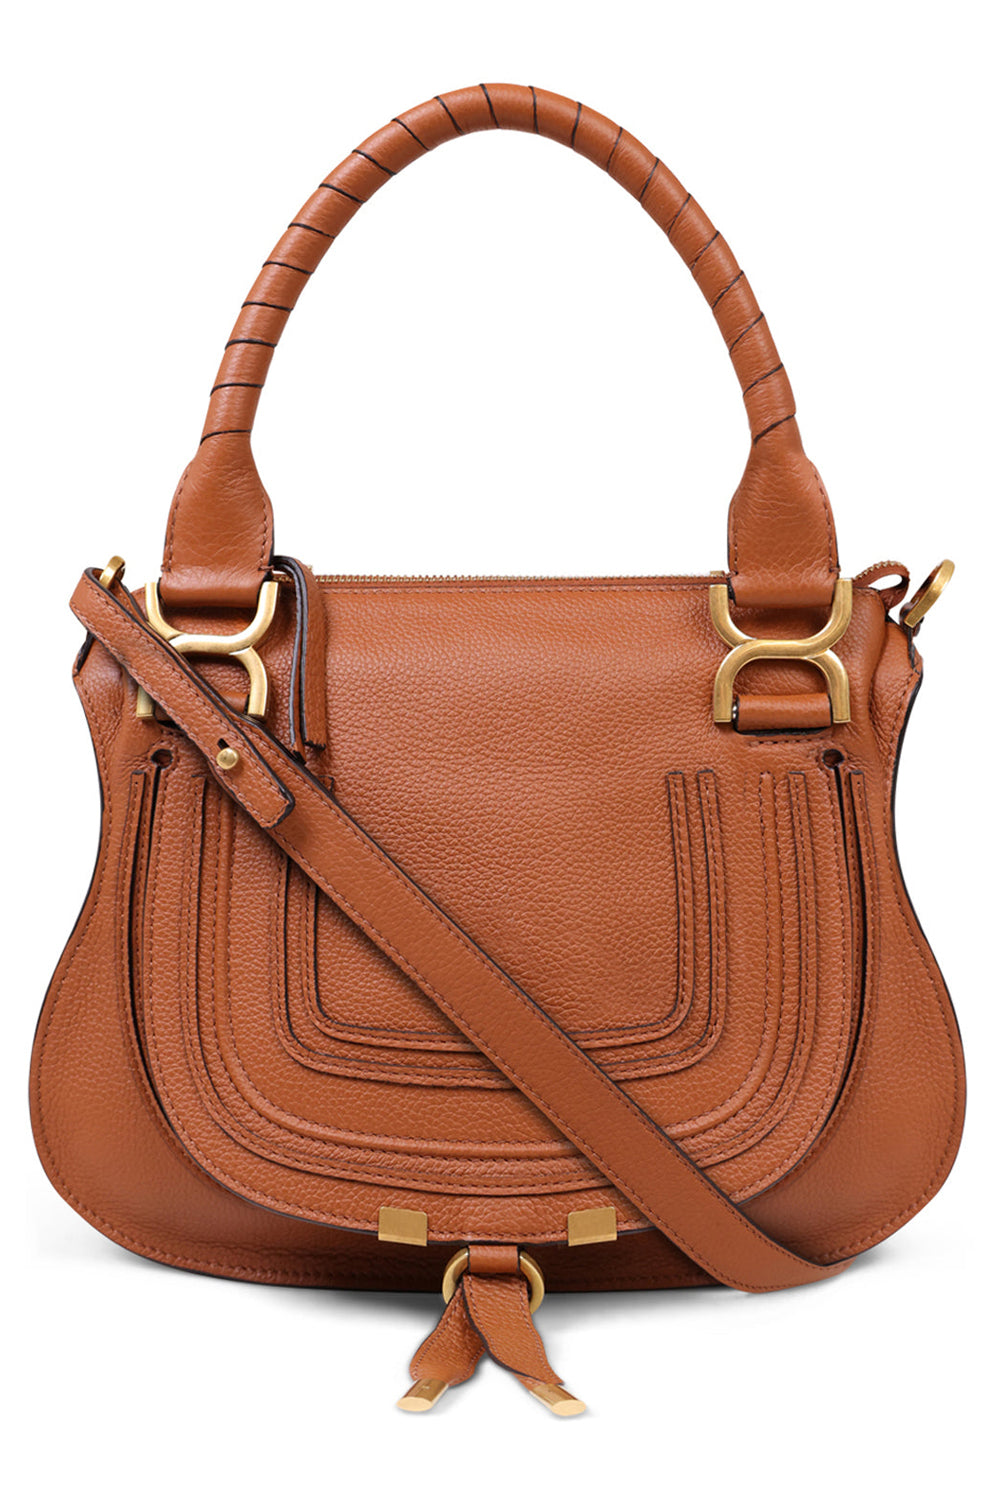 CHLOE BAGS BROWN MARCIE SMALL DOUBLE CARRY BAG | TAN